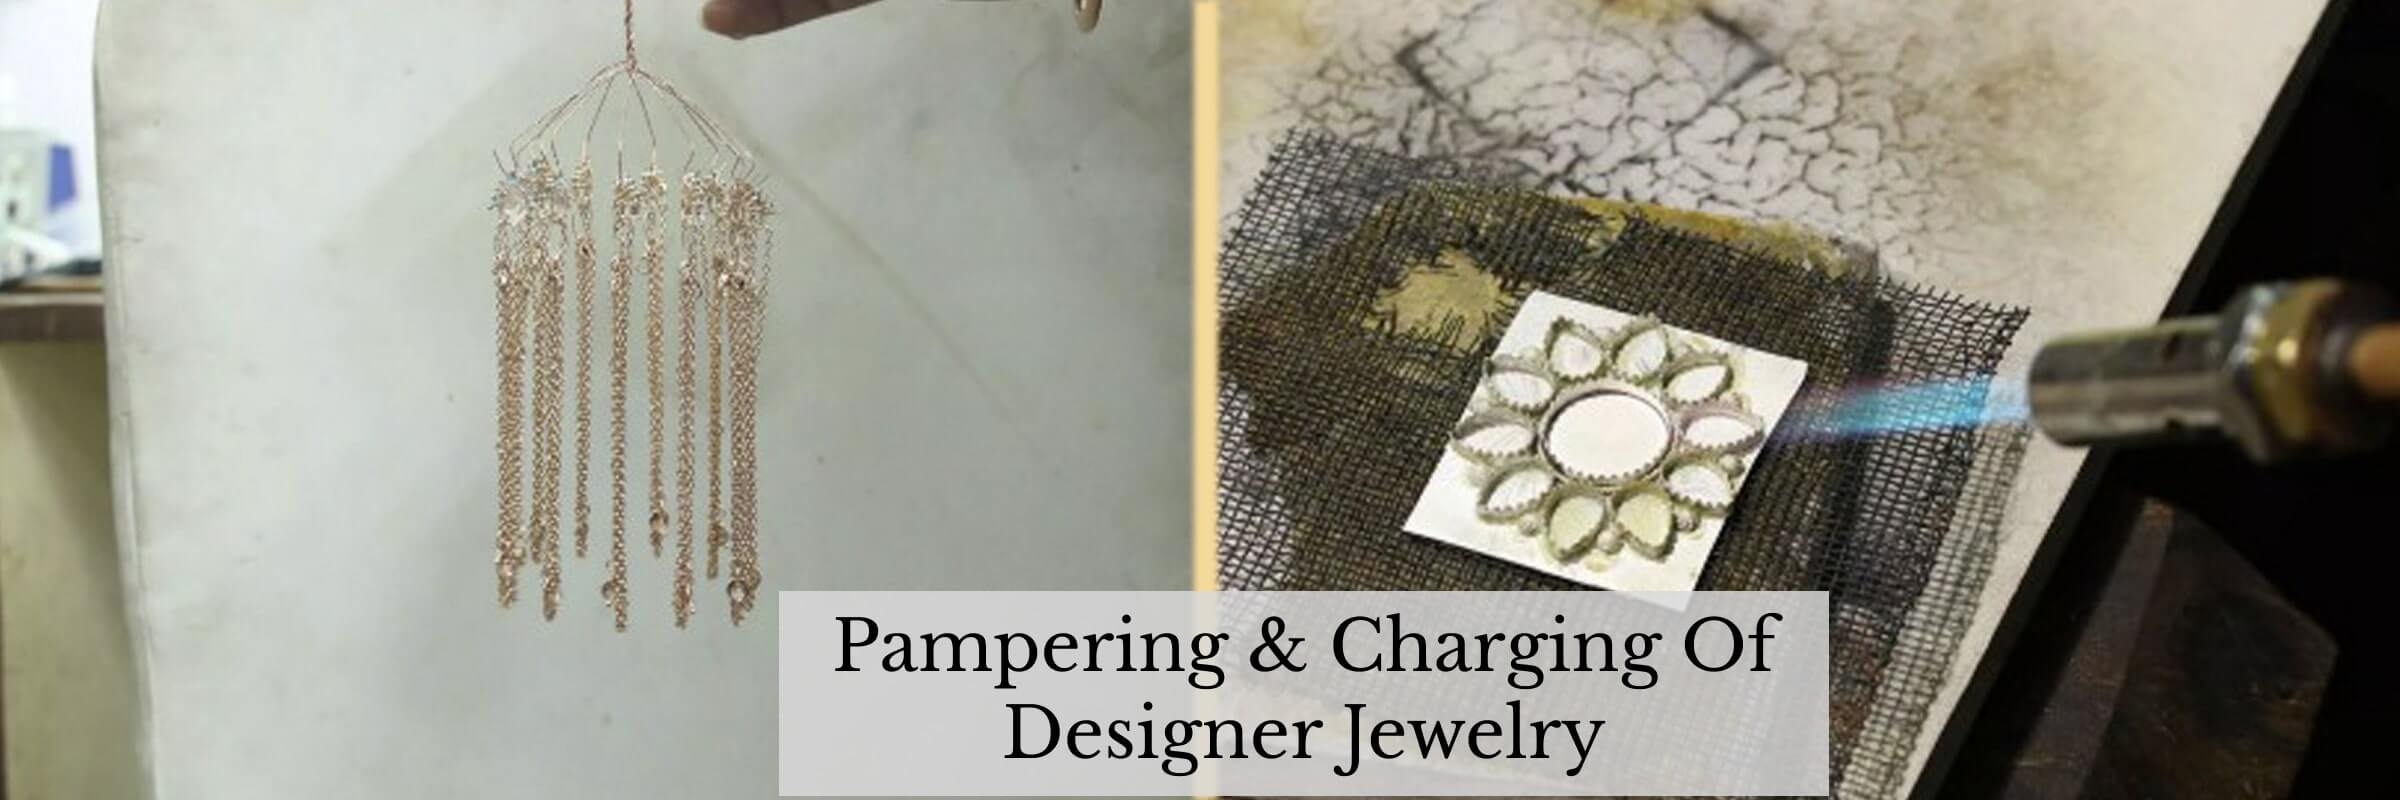 How to Cleanse and Charge Designer Jewelry